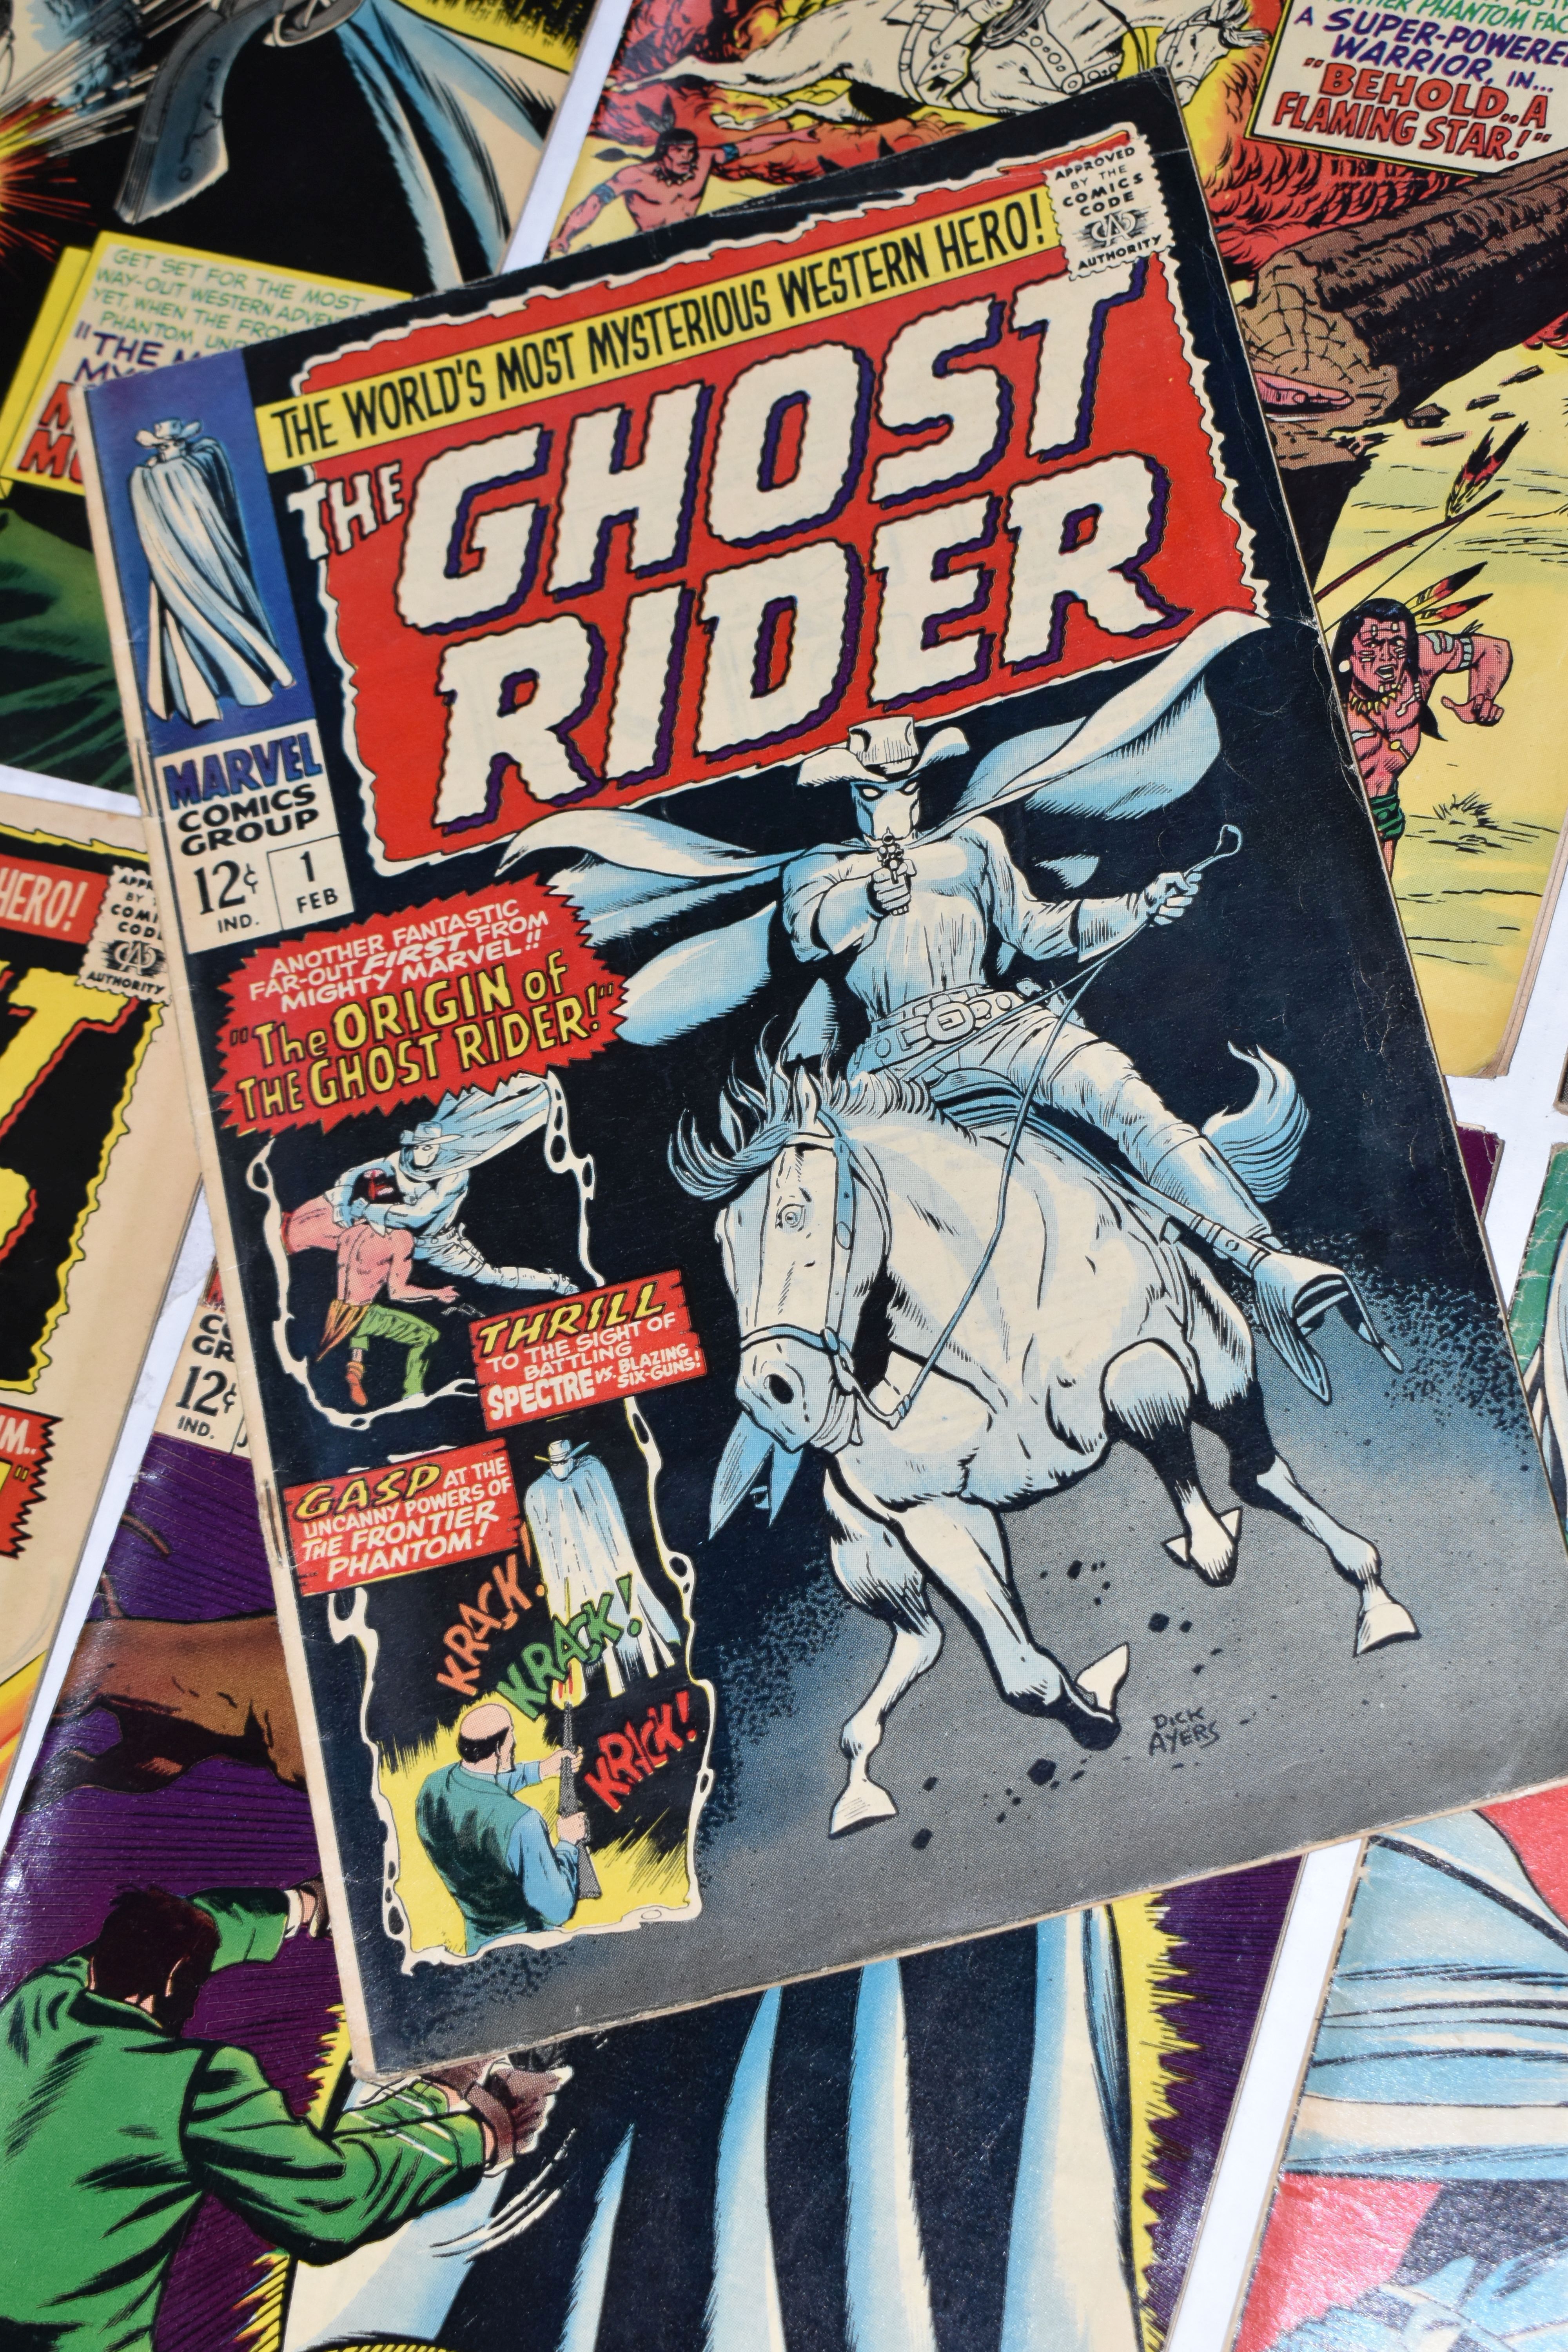 COMPLETE ORIGINAL GHOST RIDER VOLUME 1 MARVEL COMICS, features the first appearance of the - Image 2 of 25